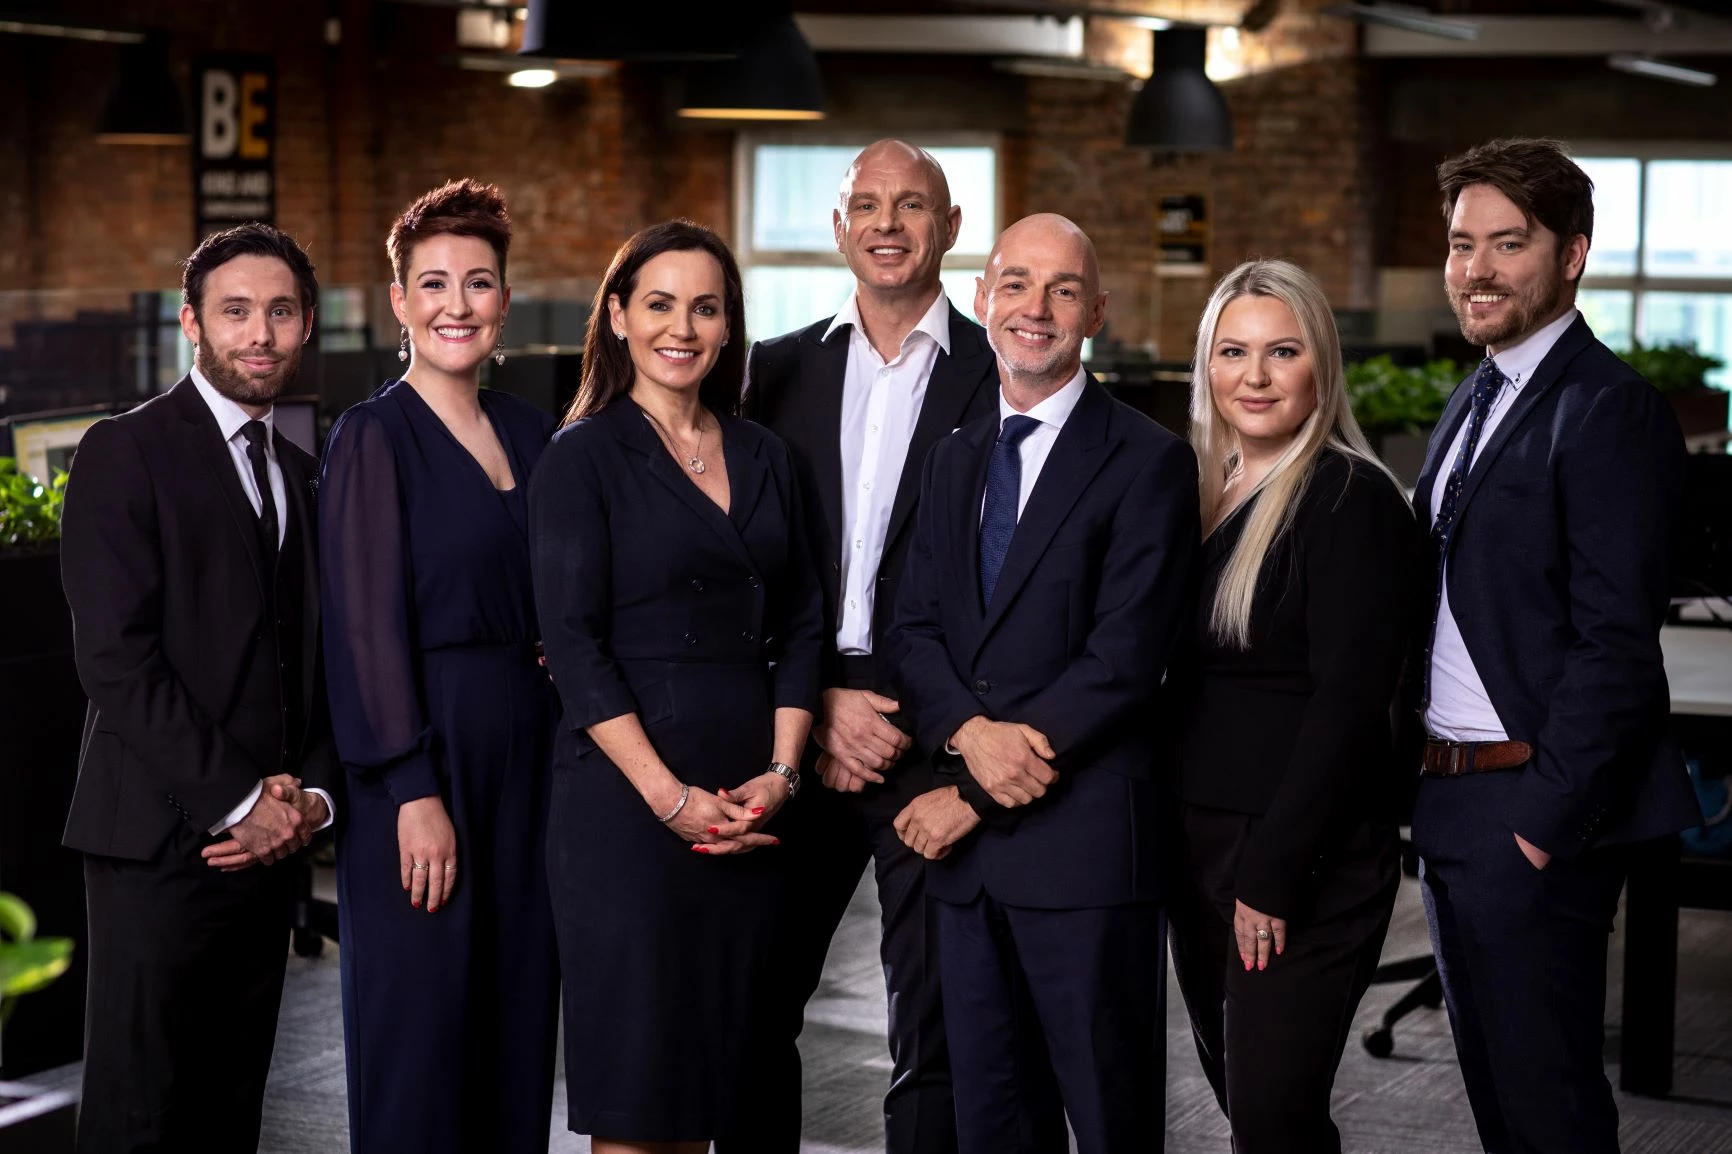 Beyond Group’s specialist Family and Corporate practices promote four key individuals